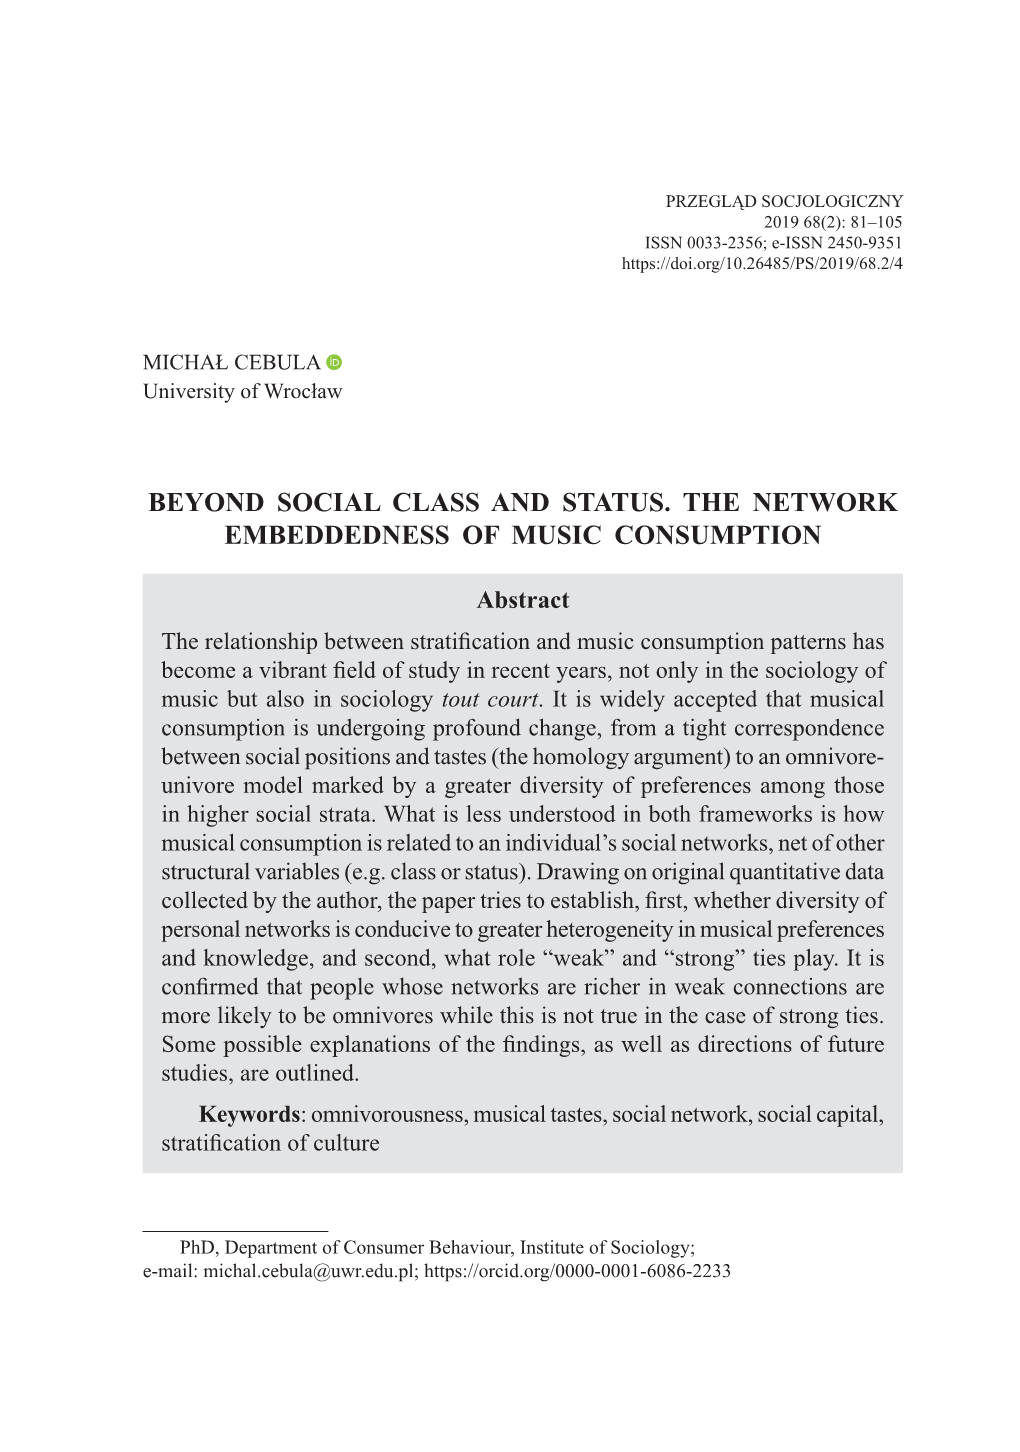 Beyond Social Class and Status. the Network Embeddedness of Music Consumption